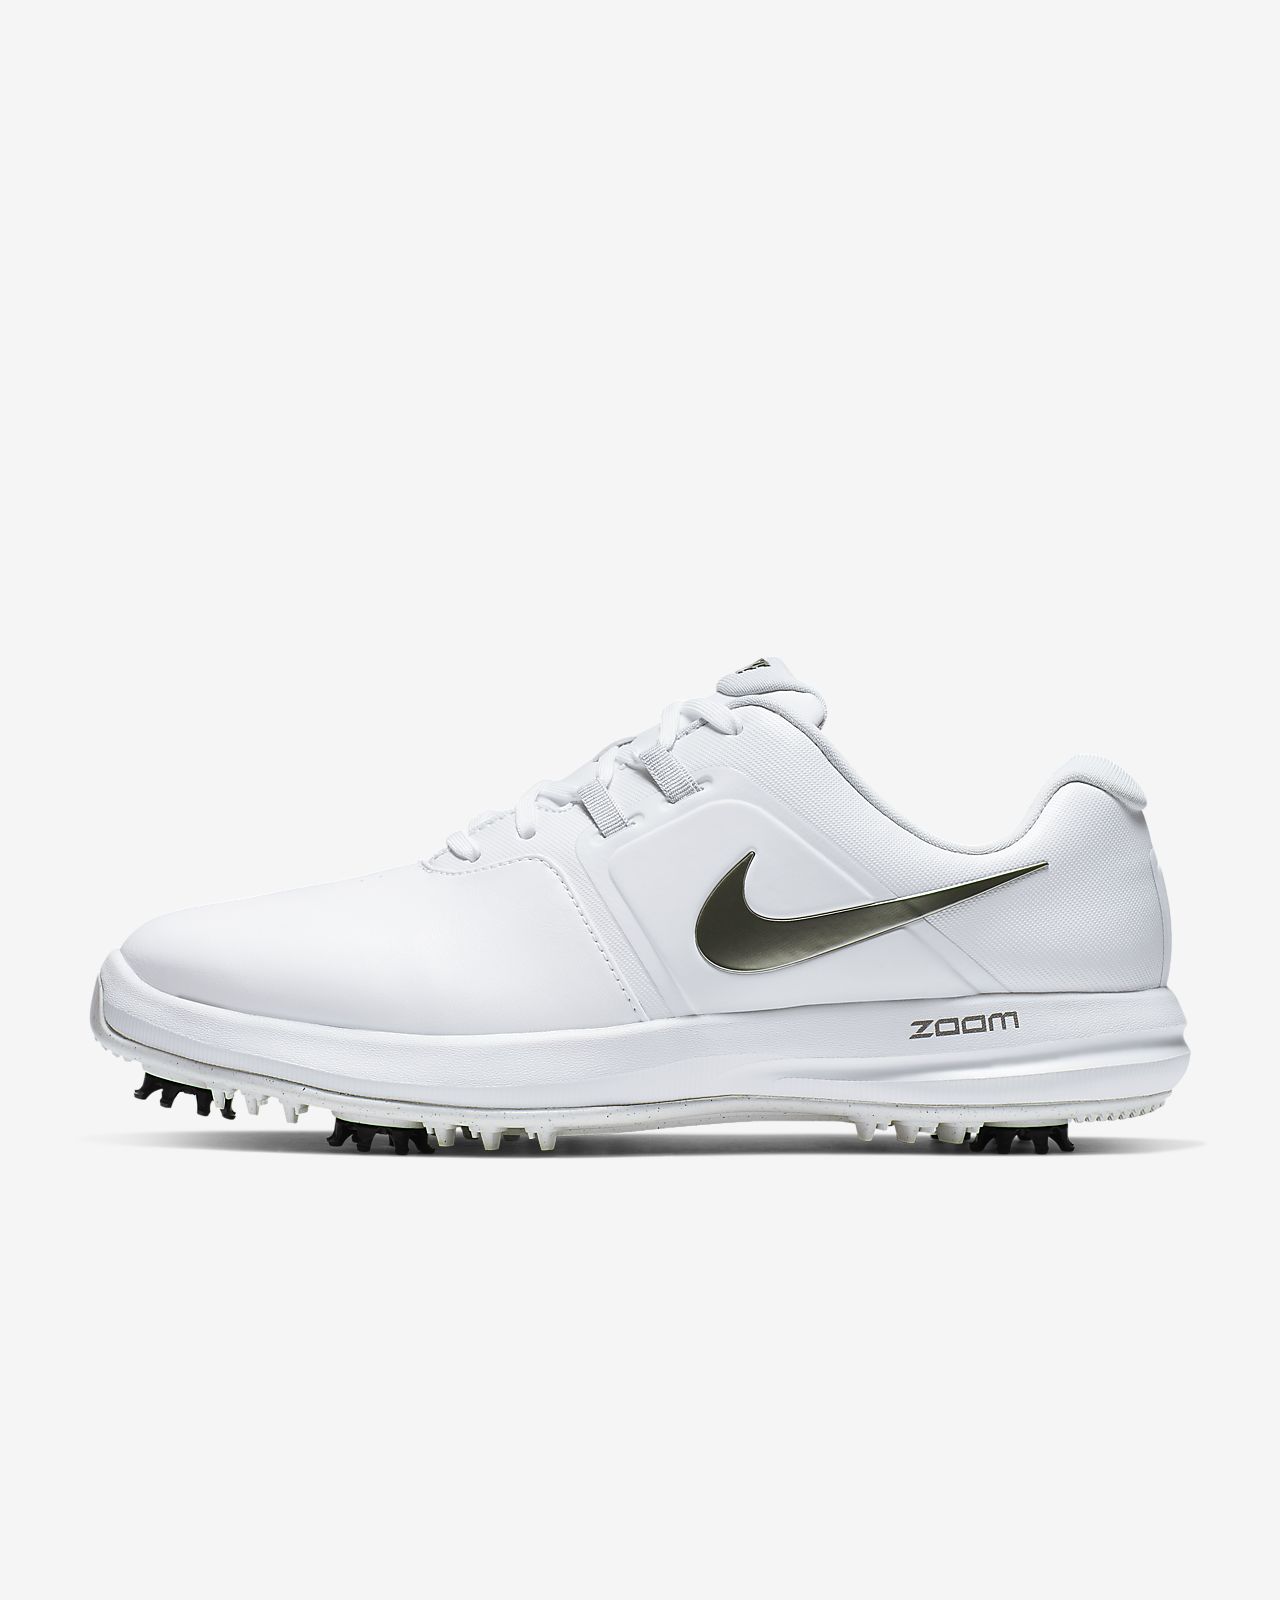 nike air zoom victory tour golf shoes review